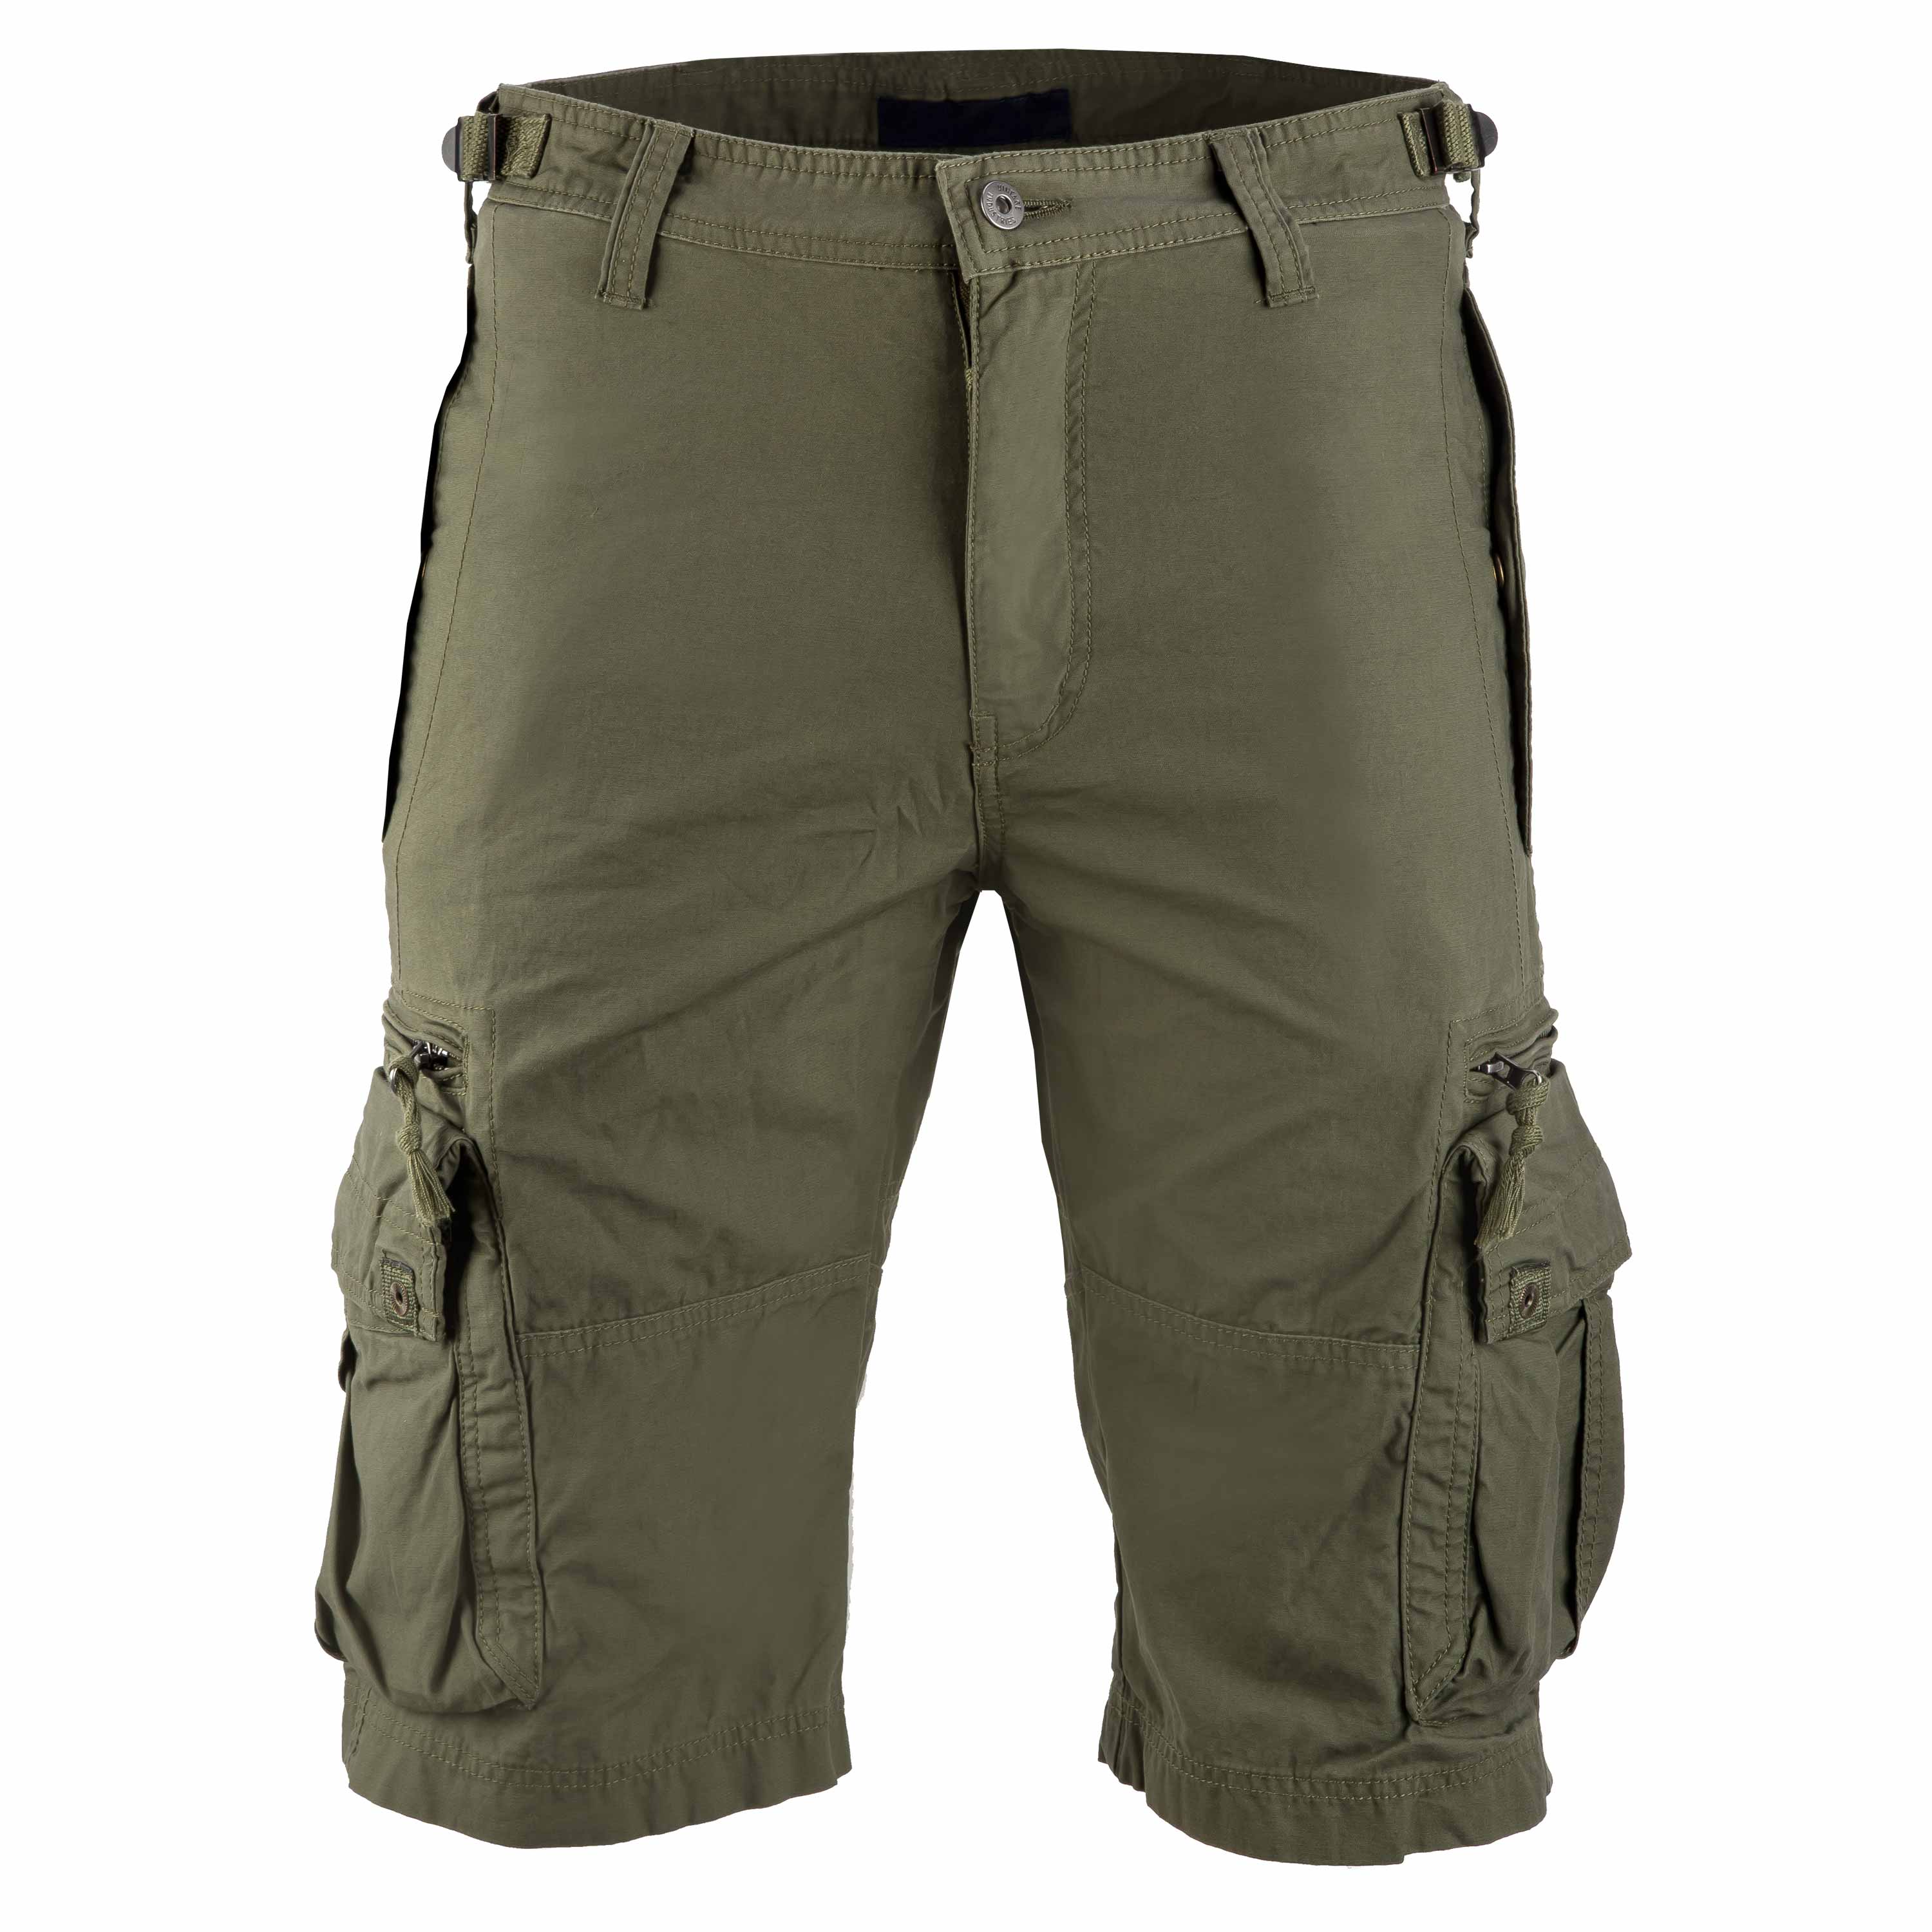 Purchase the Vintage Industries Shorts Gandor olive by ASMC